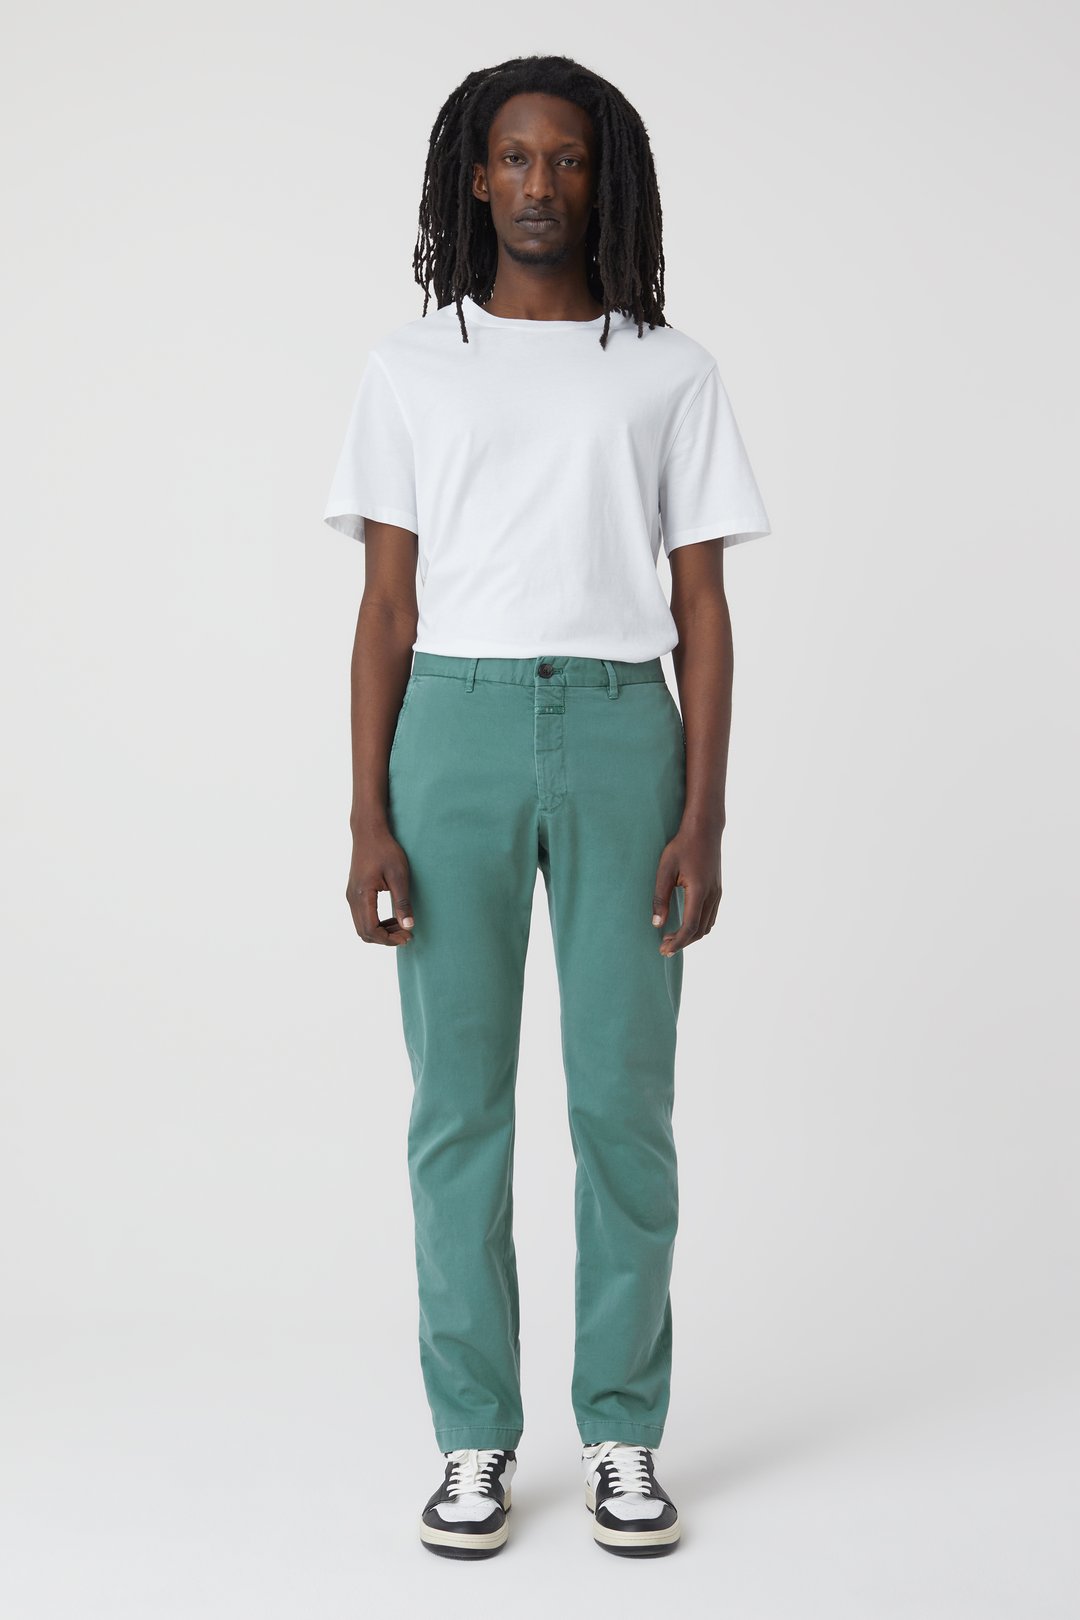 Men's Skinny Fit Chinos | Stretchy Chino Pants for Men | Kojo Fit – Kojo Fit